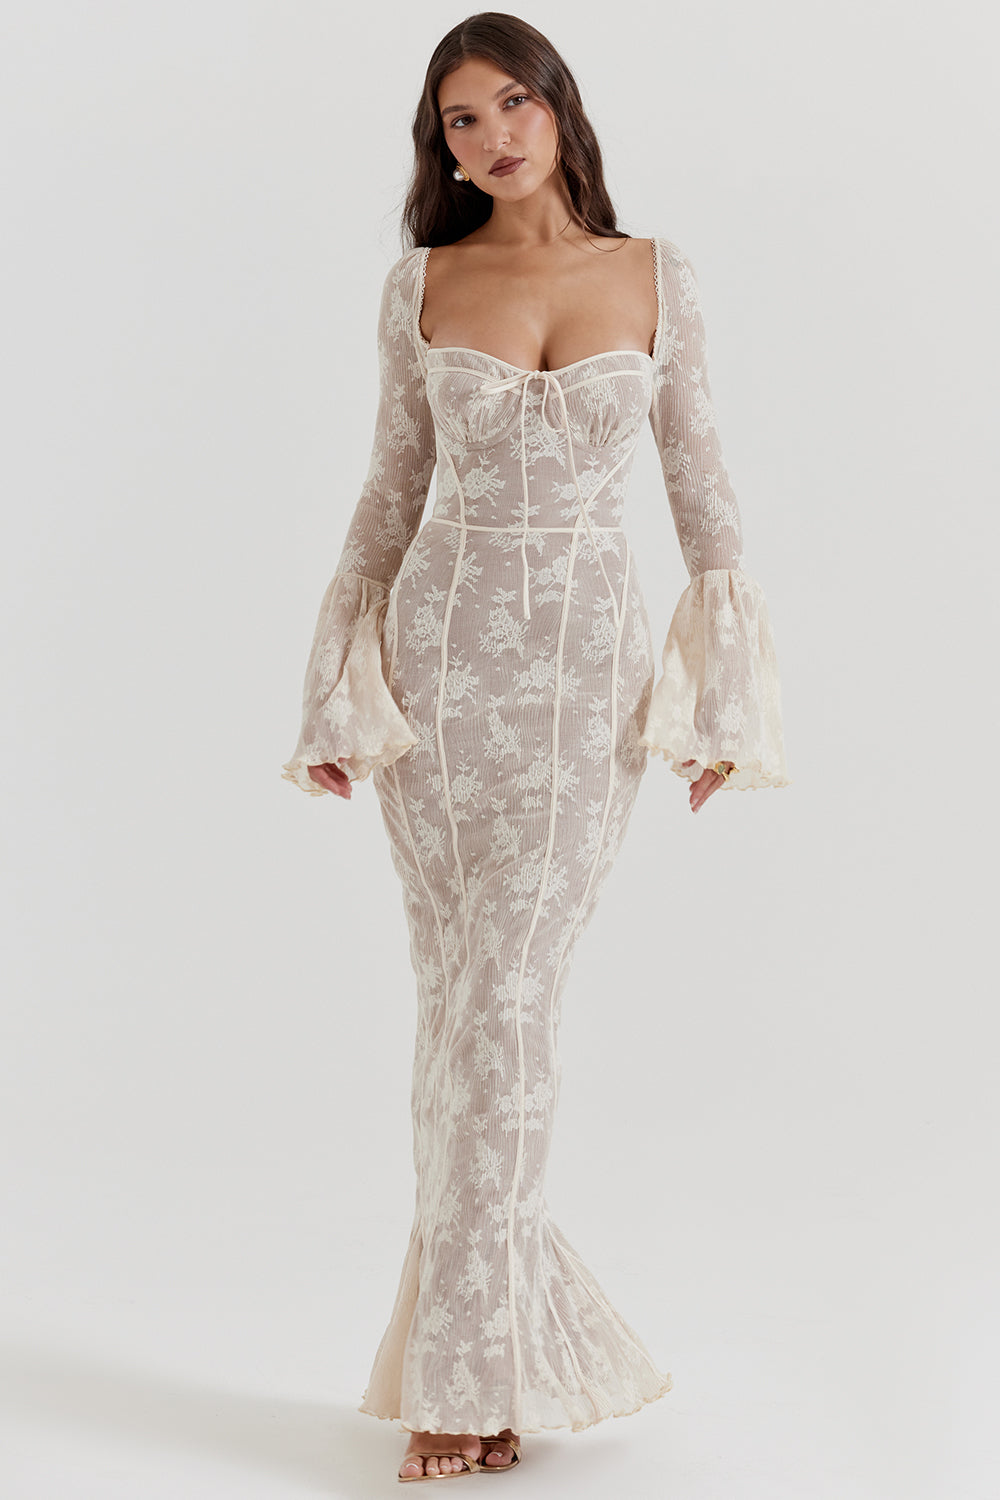 Dare to be bold with our Robe Delilah! This long sleeve, elegant white maxi dress features a sexy square collar and delicate lace details. Perfect for the autumn season, its slim fit will enhance your curves and elevate your style. Take a risk and step out in this daring and chic dress!